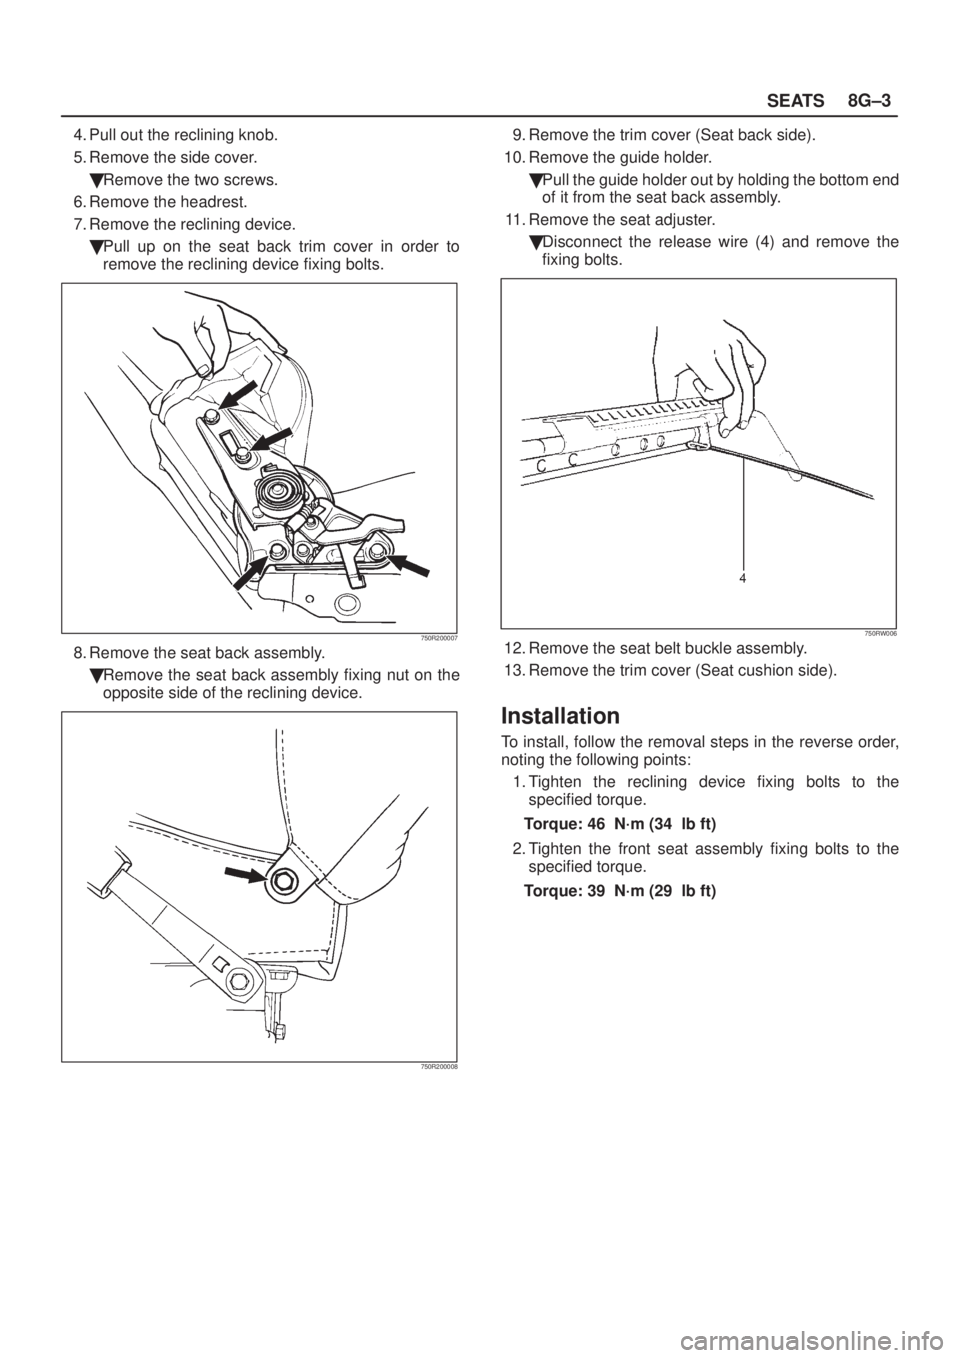 ISUZU AXIOM 2002  Service Repair Manual SEATS8G±3
4. Pull out the reclining knob.
5. Remove the side cover.
Remove the two screws.
6. Remove the headrest.
7. Remove the reclining device.
Pull up on the seat back trim cover in order to
re